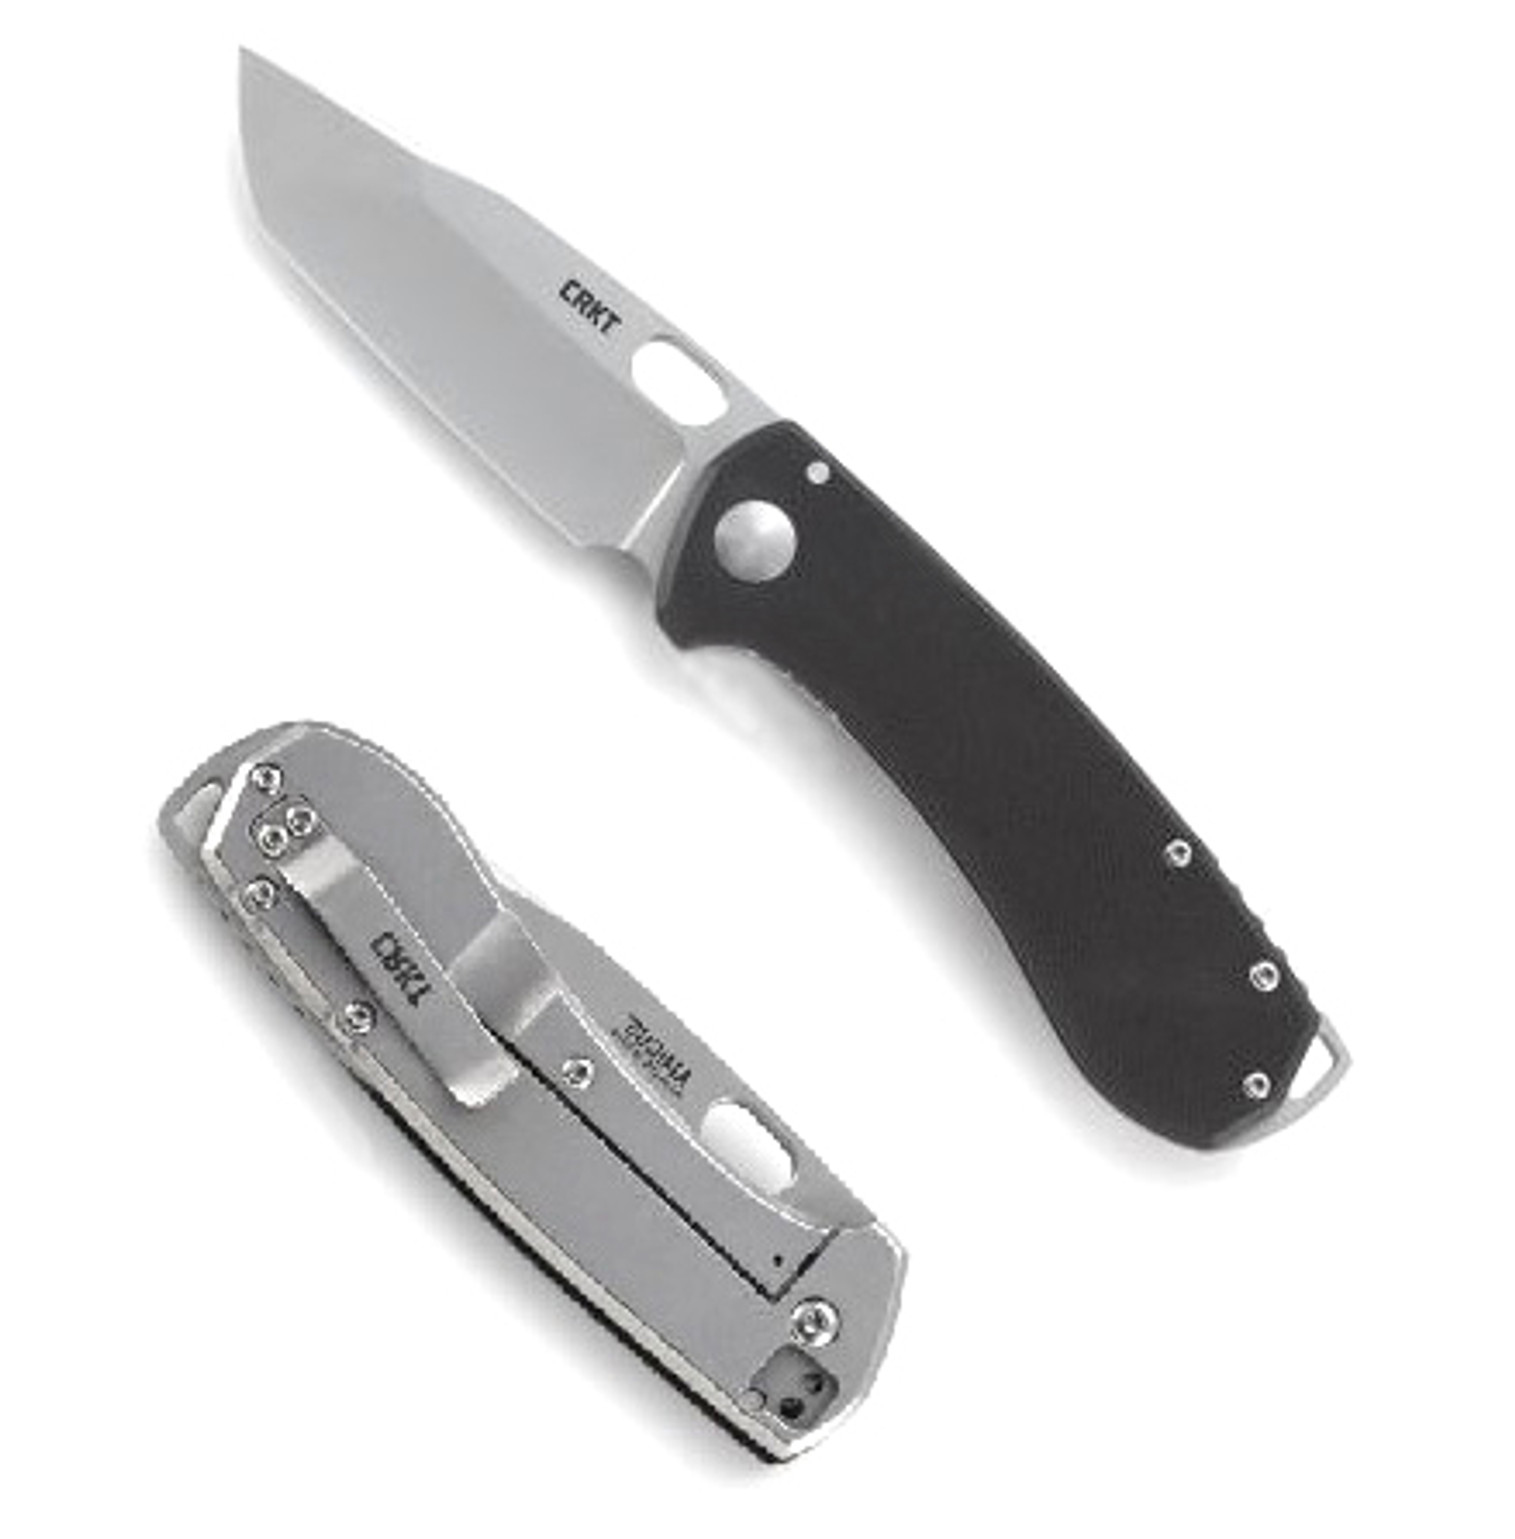 CRKT 5441 Amicus Compact G-10 Framelock